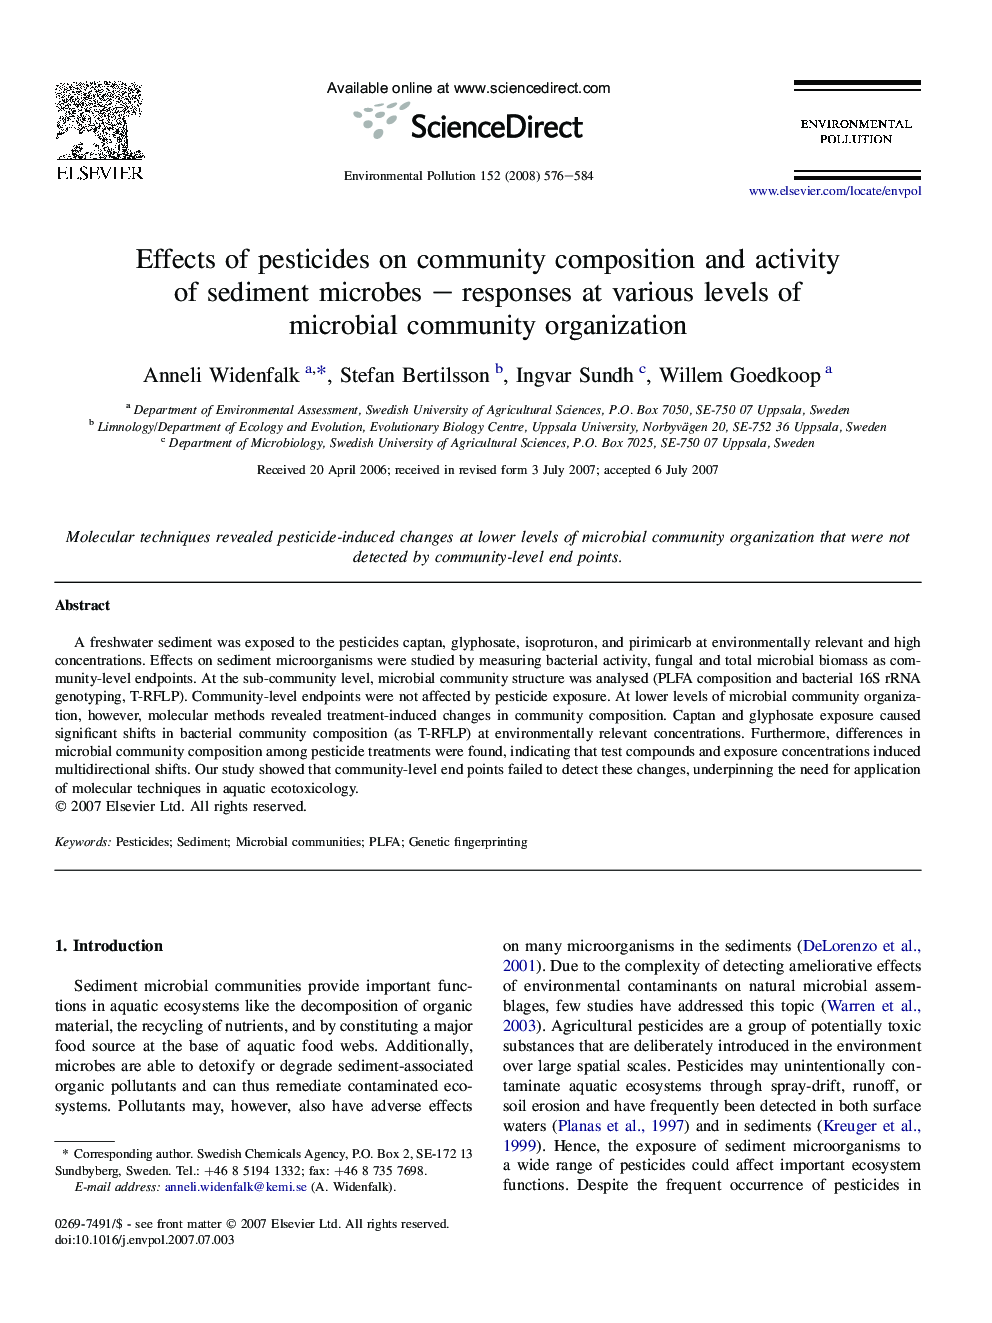 Effects of pesticides on community composition and activity of sediment microbes – responses at various levels of microbial community organization